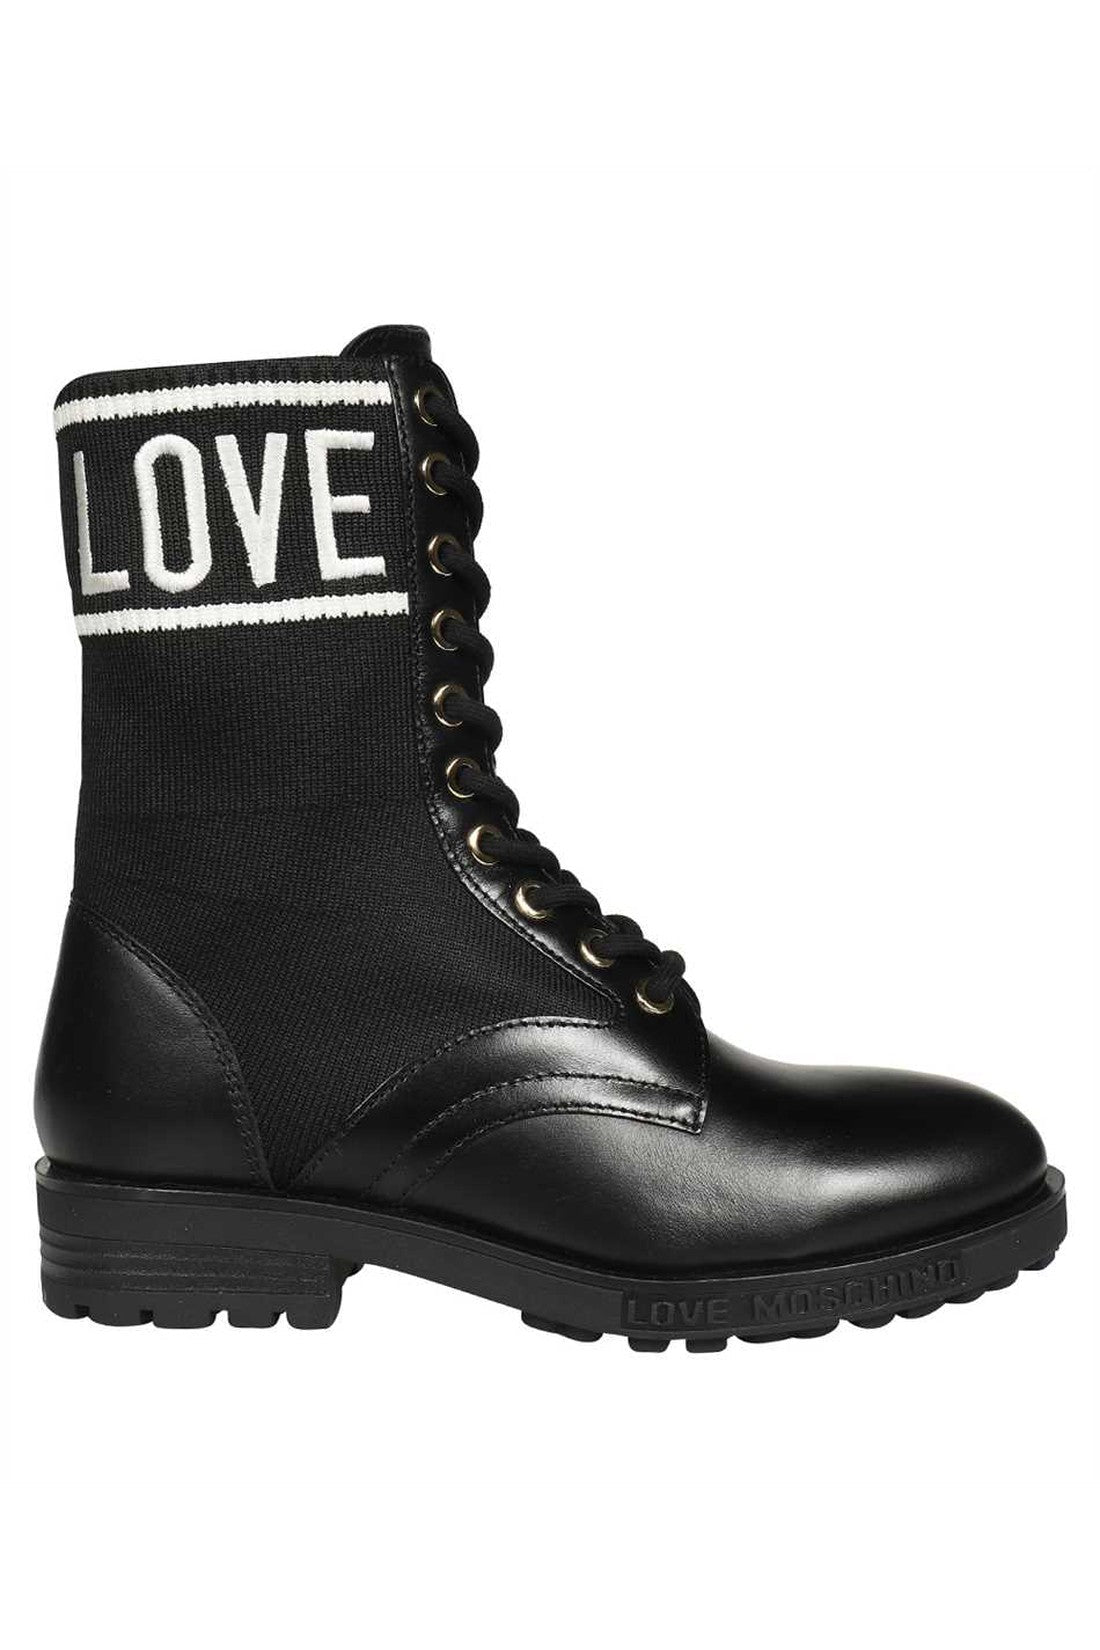 Lace-up ankle boots-Love Moschino-OUTLET-SALE-38-ARCHIVIST